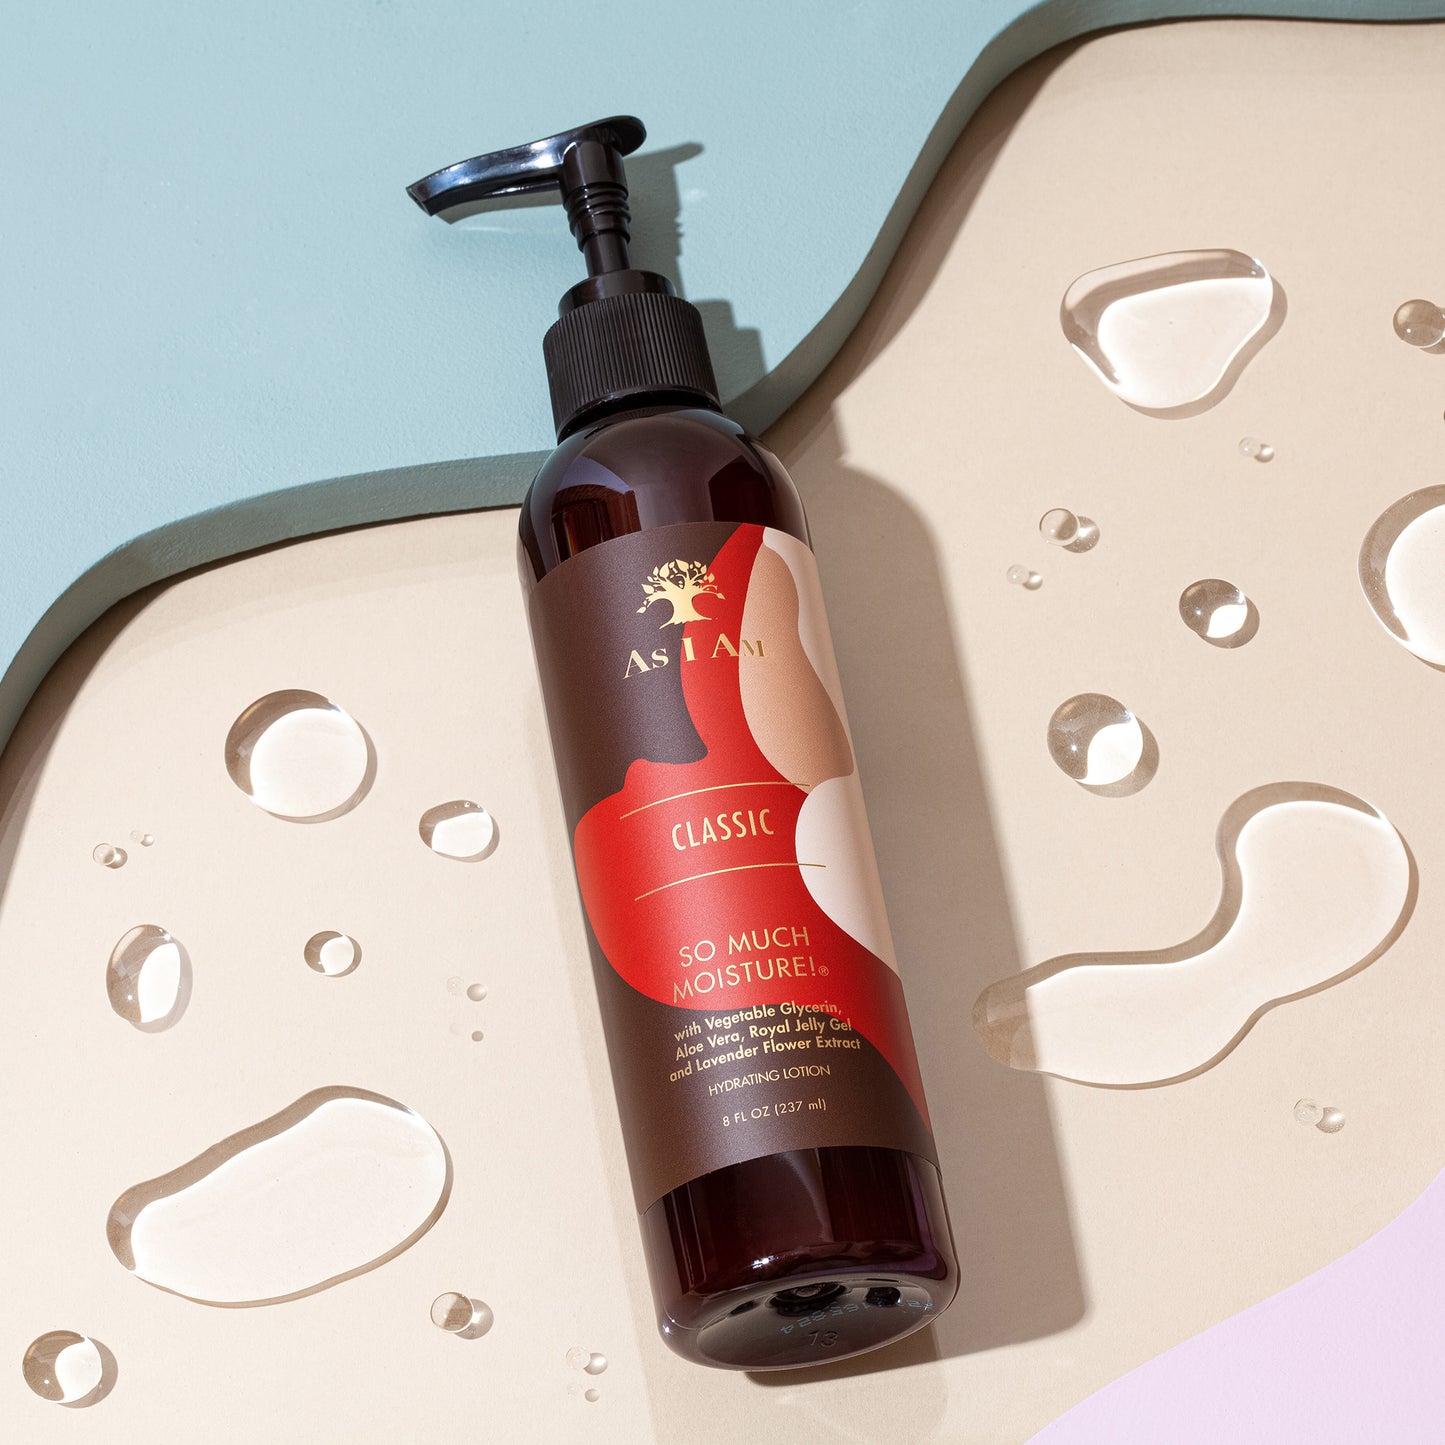 So Much Moisture! Hydrating Lotion